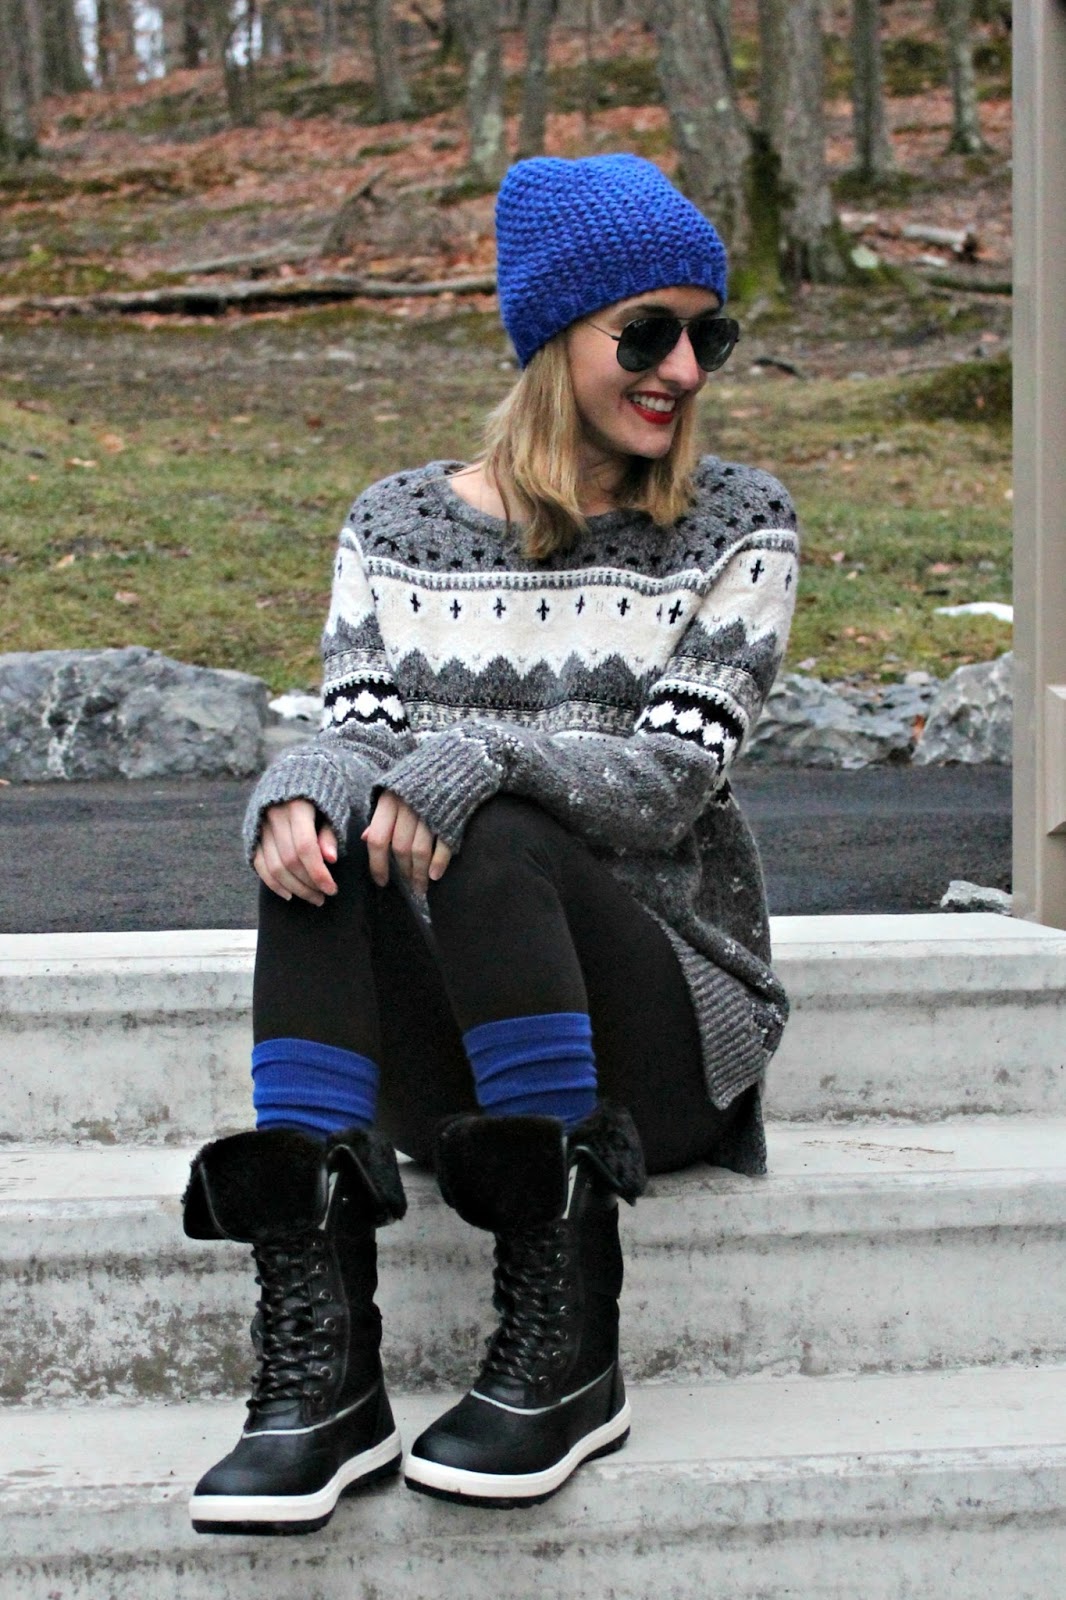 girl wearing black leggings, black winter boots, thick blue knee socks, a winter-themed sweater, a blue knit beanie, and black sunglasses